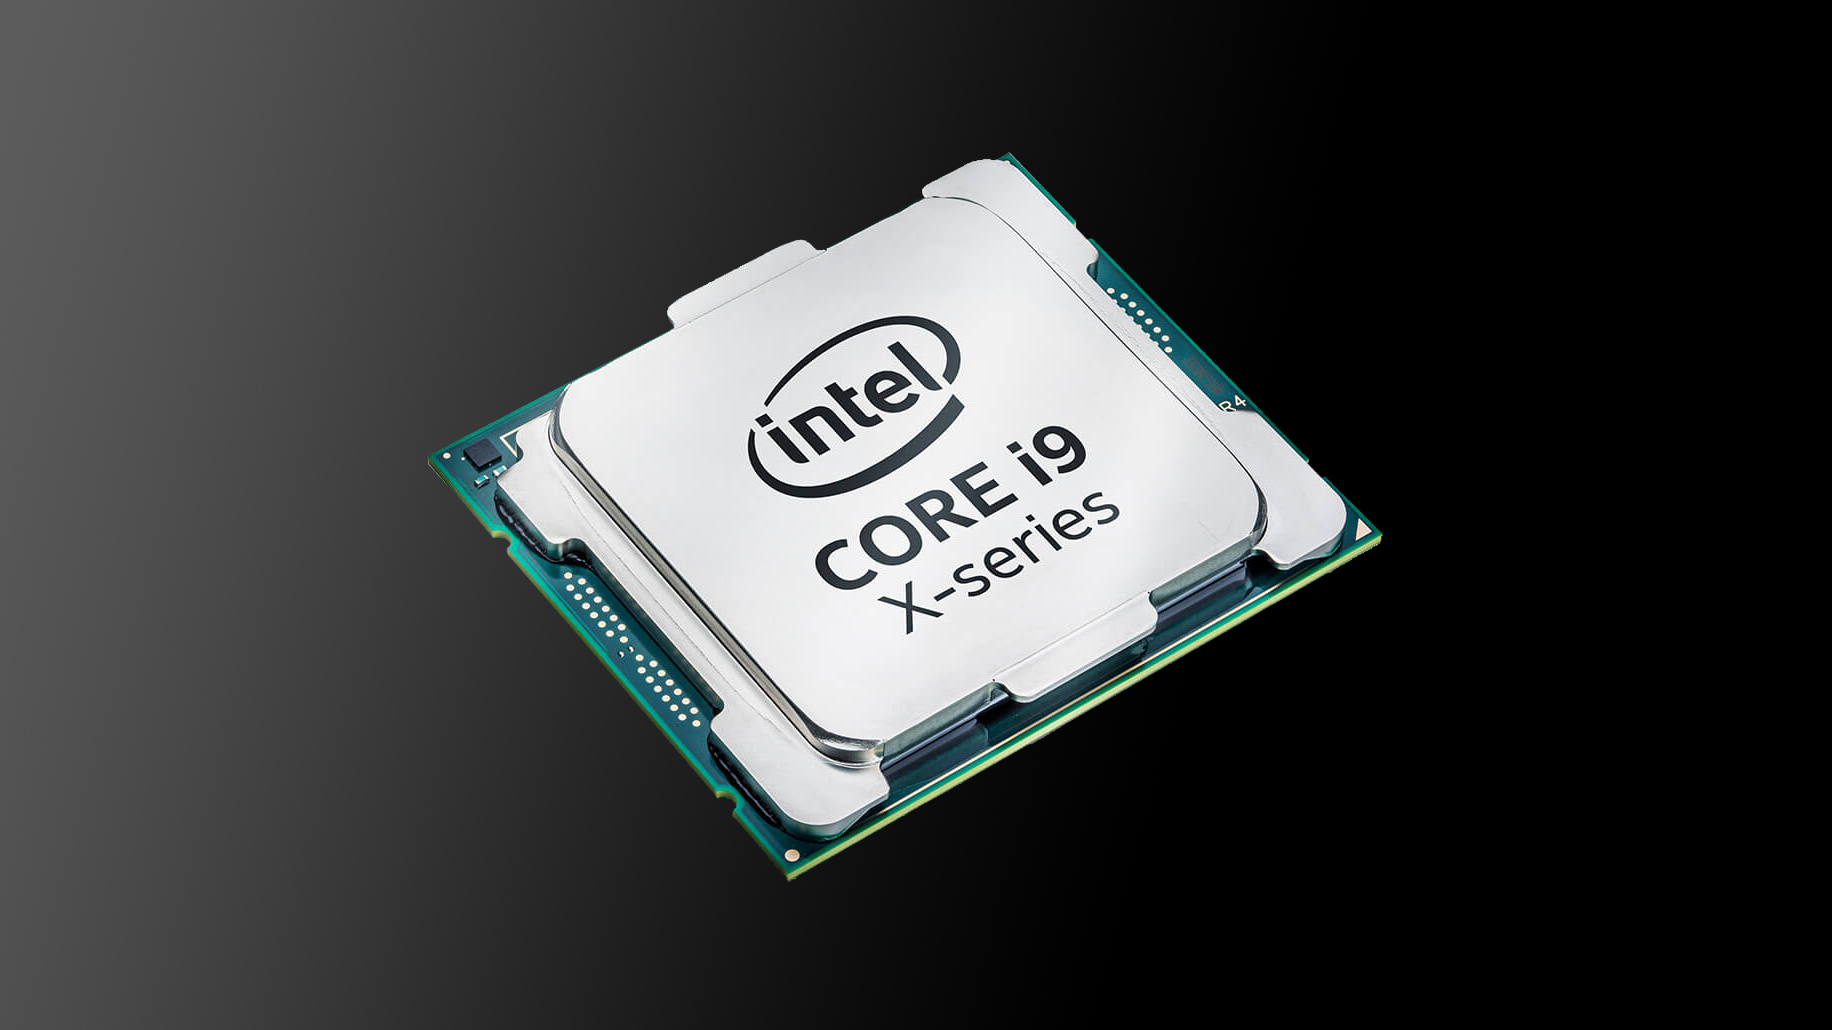 With the Intel Core i9 X-series, that's how